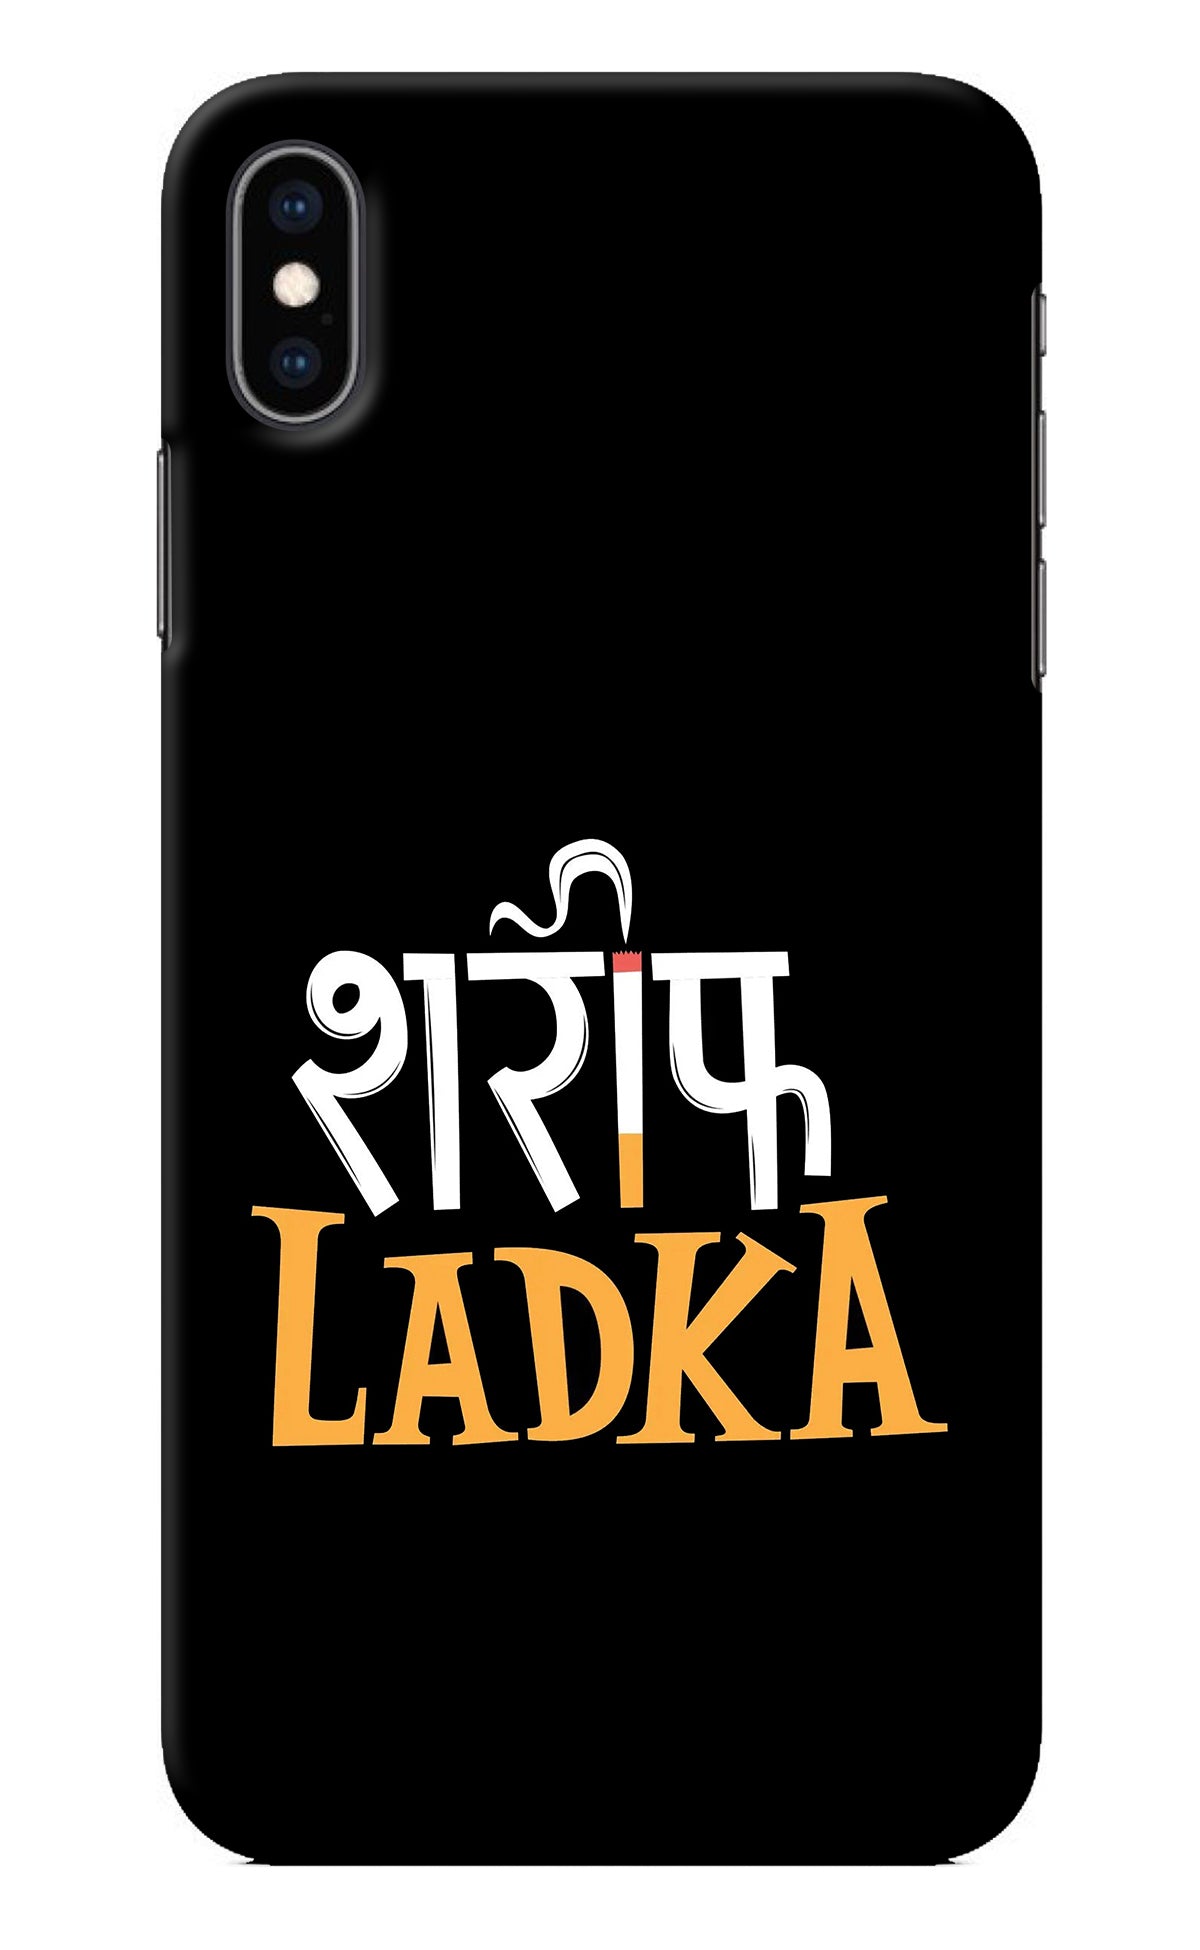 Shareef Ladka iPhone XS Max Back Cover